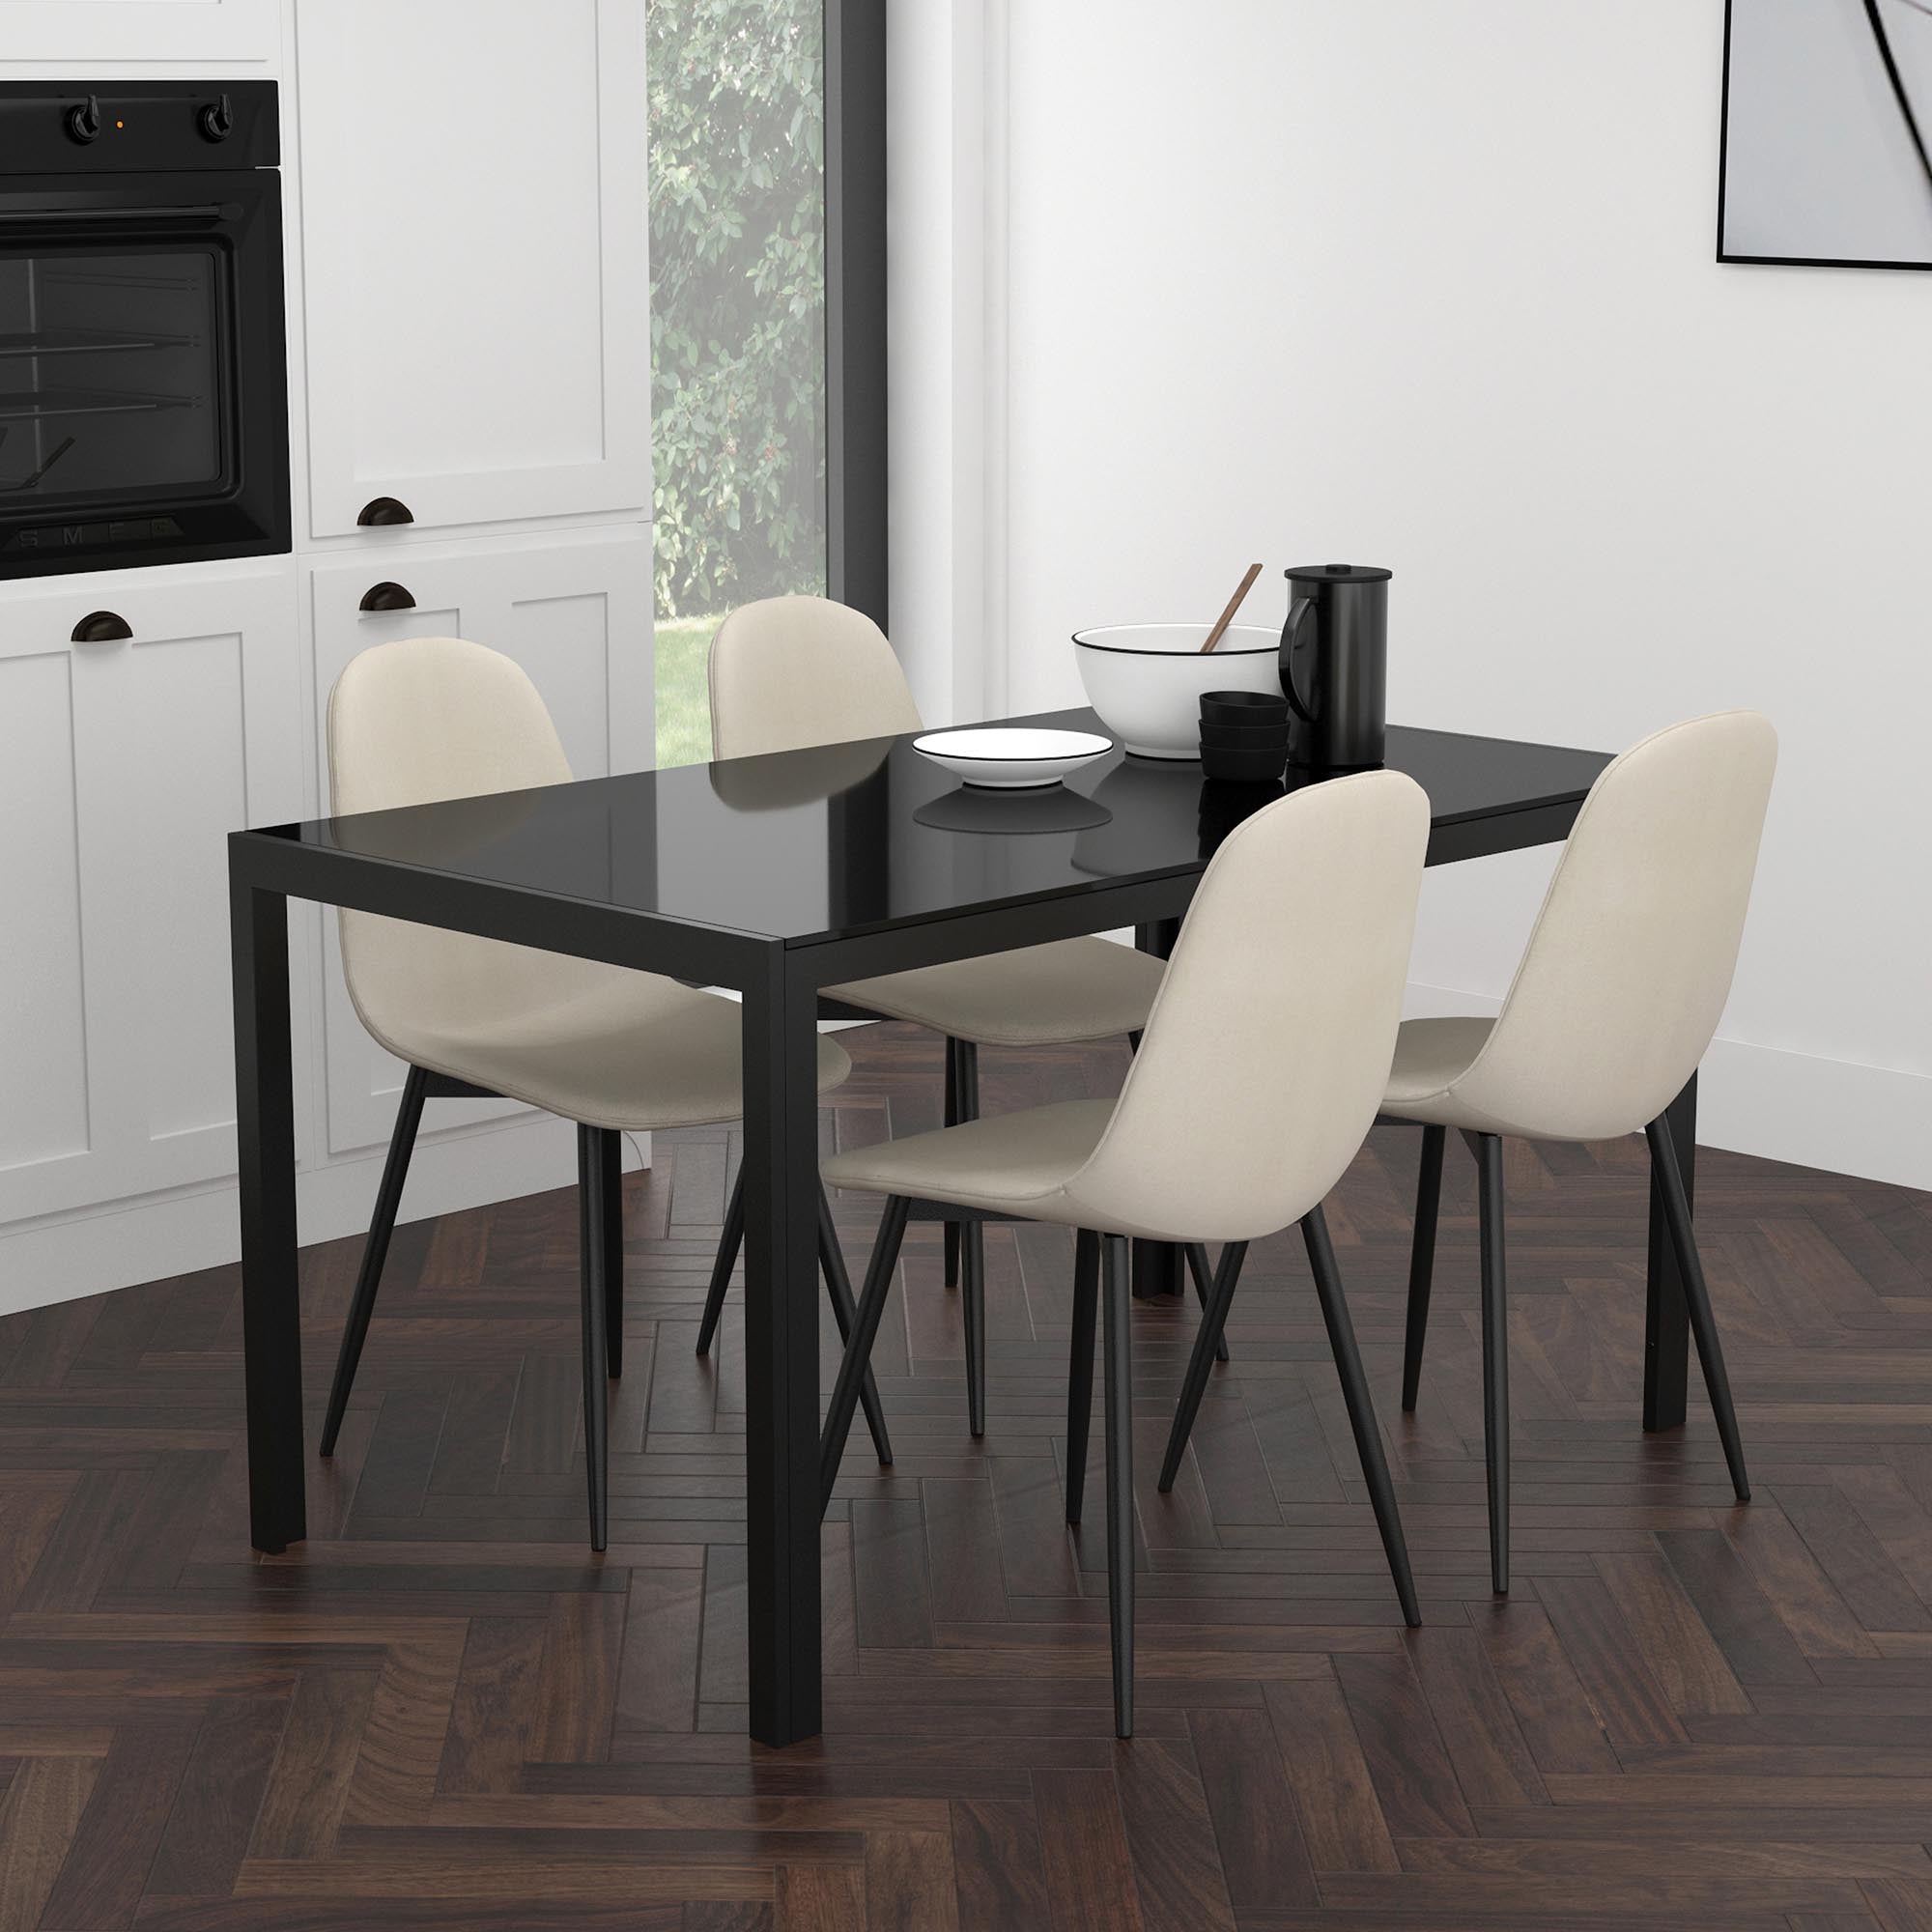 CONTRA 55" BLACK GLASS TABLE / OLLY BEIGE CHAIRS - 5PC DINING SET